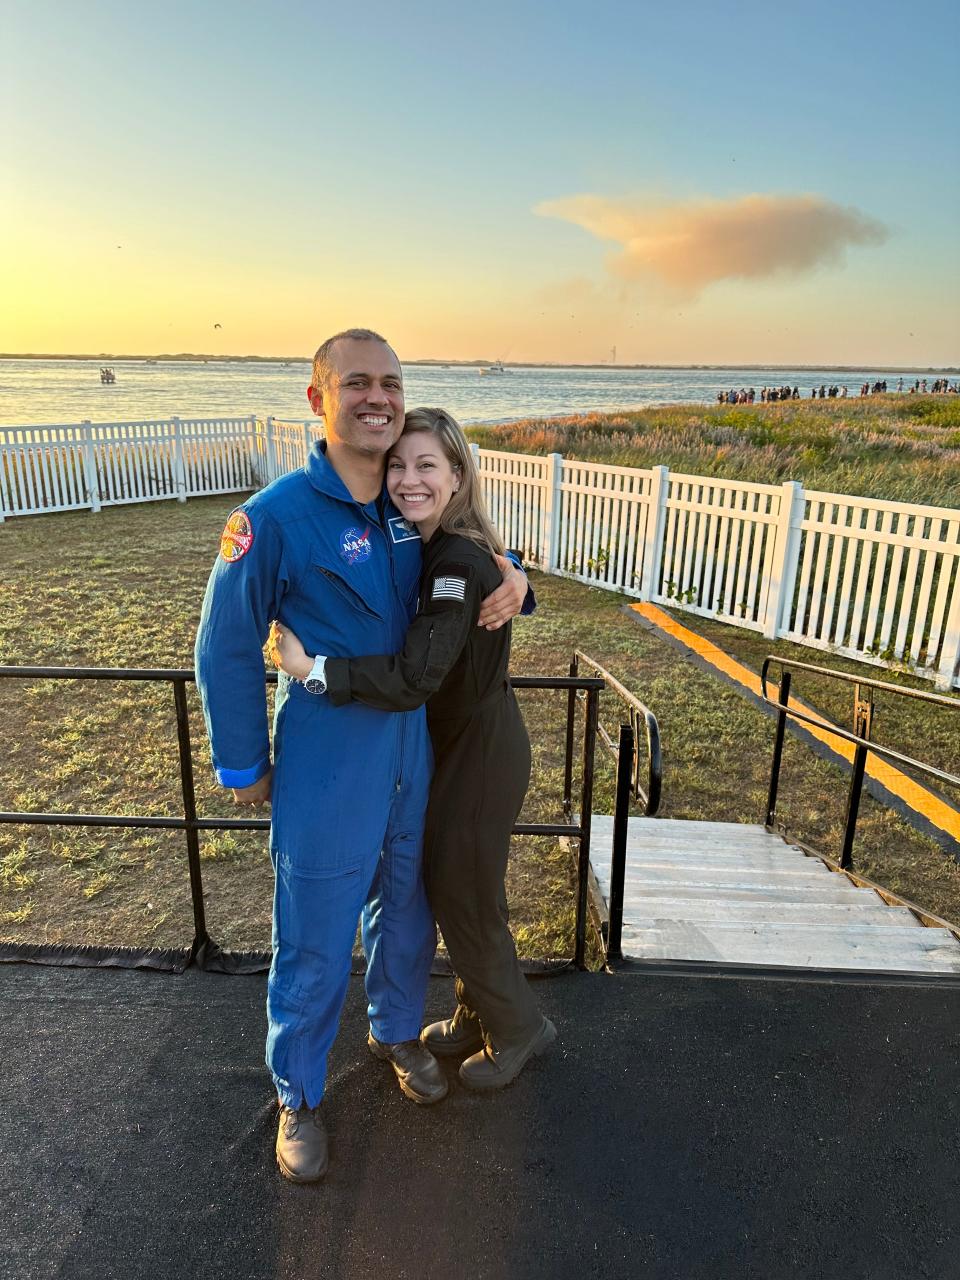 Anil and Anna Menon hugging on the beach in their respective NASA and SpaceX astronaut jump suits.